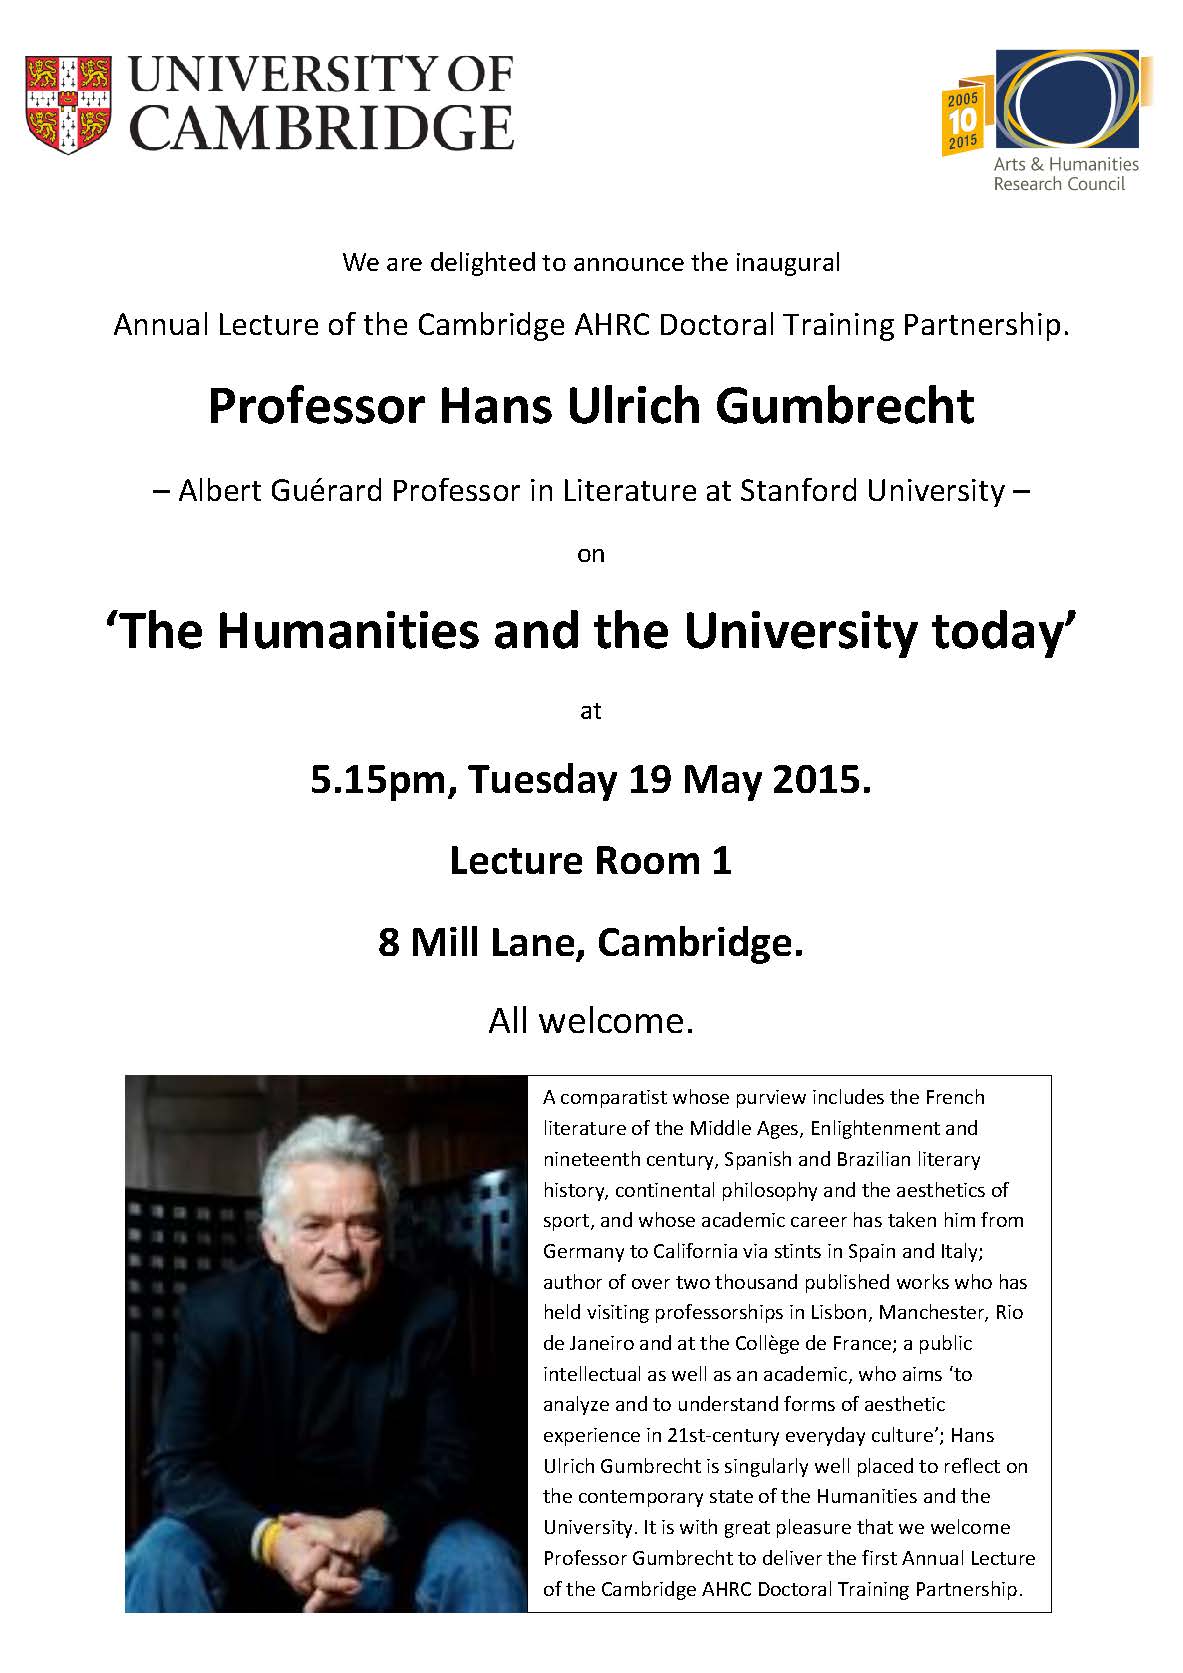 Hans Ulrich Gumbrecht on 'The Humanities and the University Today'